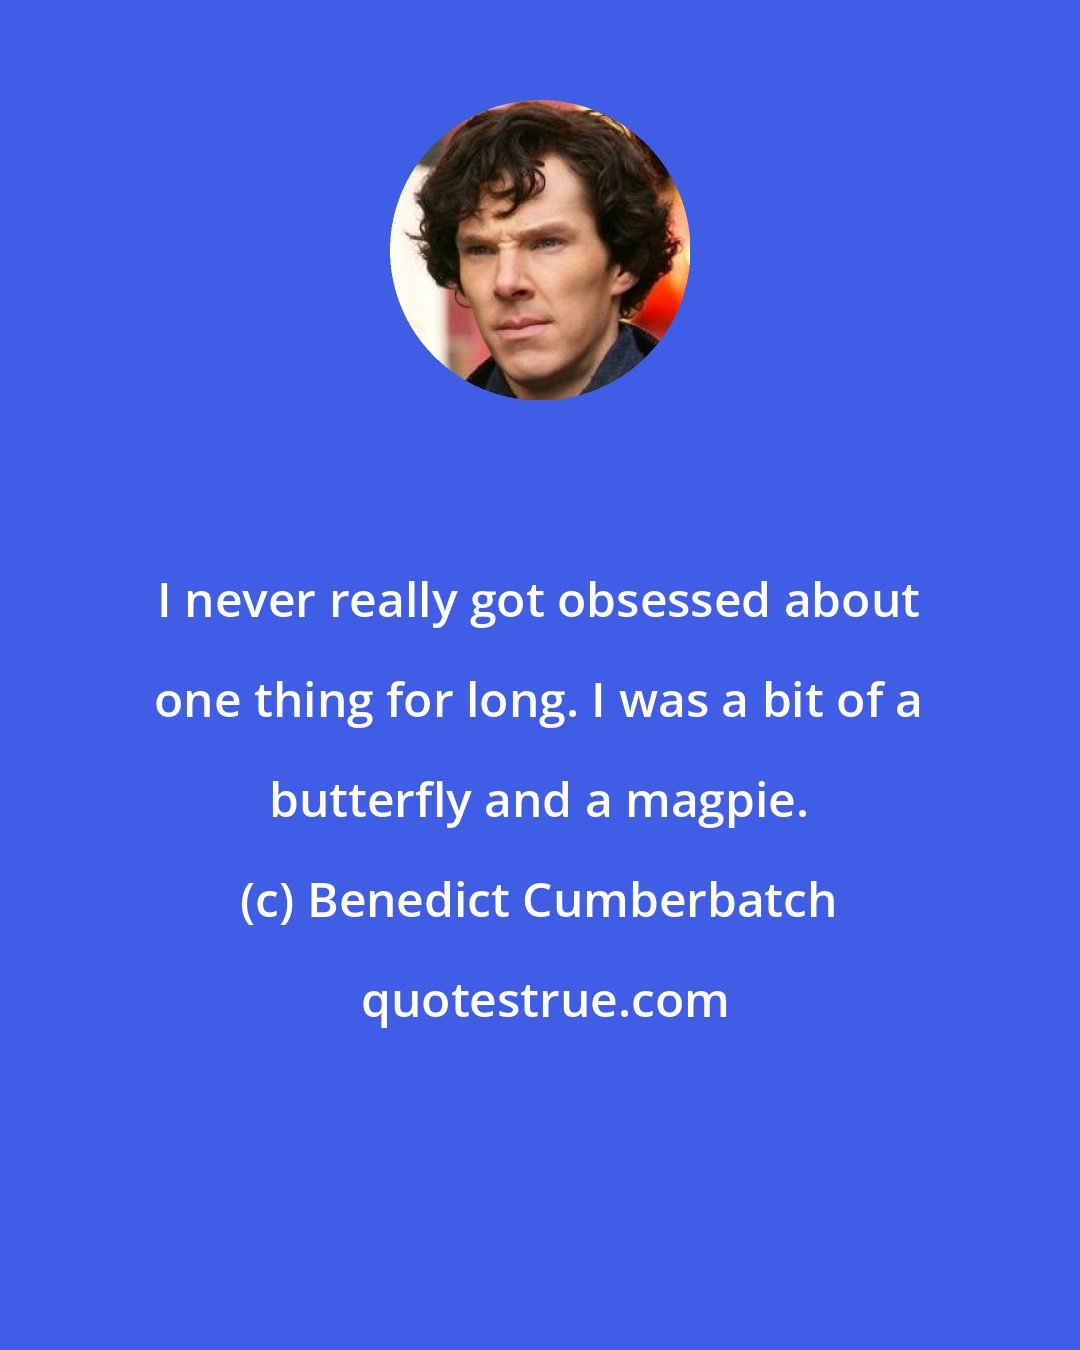 Benedict Cumberbatch: I never really got obsessed about one thing for long. I was a bit of a butterfly and a magpie.